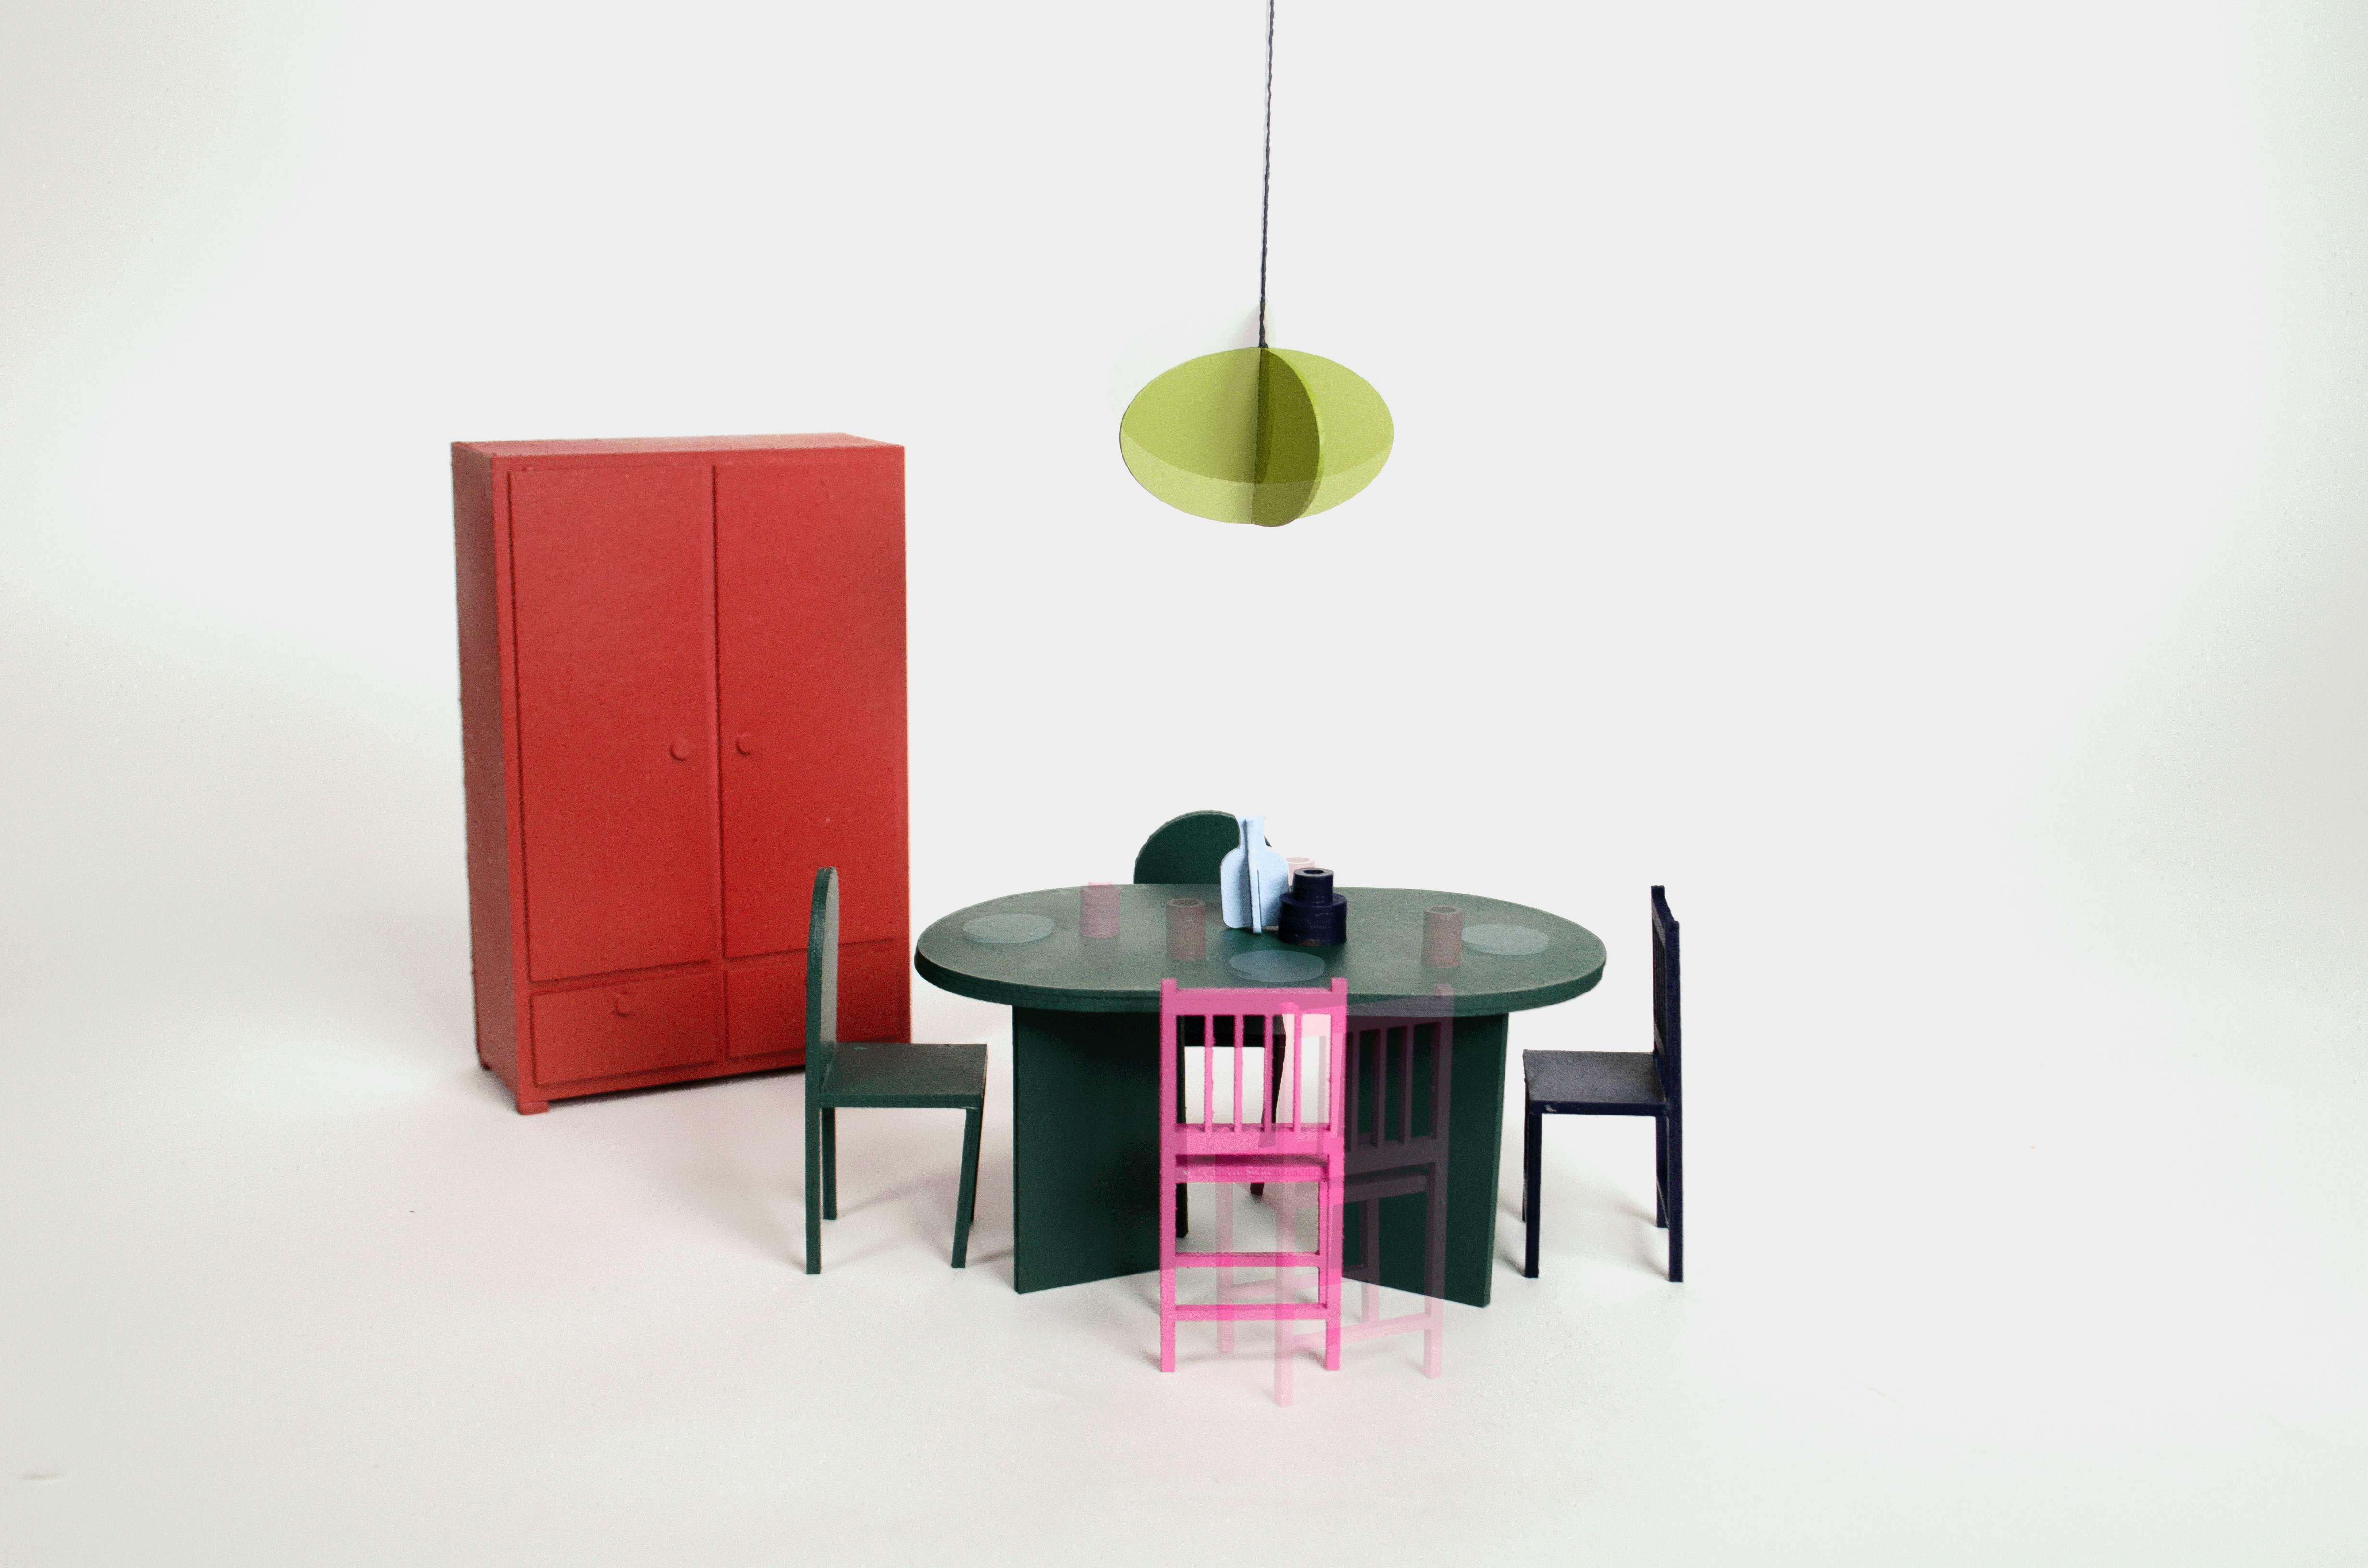 /stop%20motion%20gif%20of%20objects%20depicting%20a%20dining%20table%20scene%2C%20documenting%20the%20movement%20of%20objects.%20